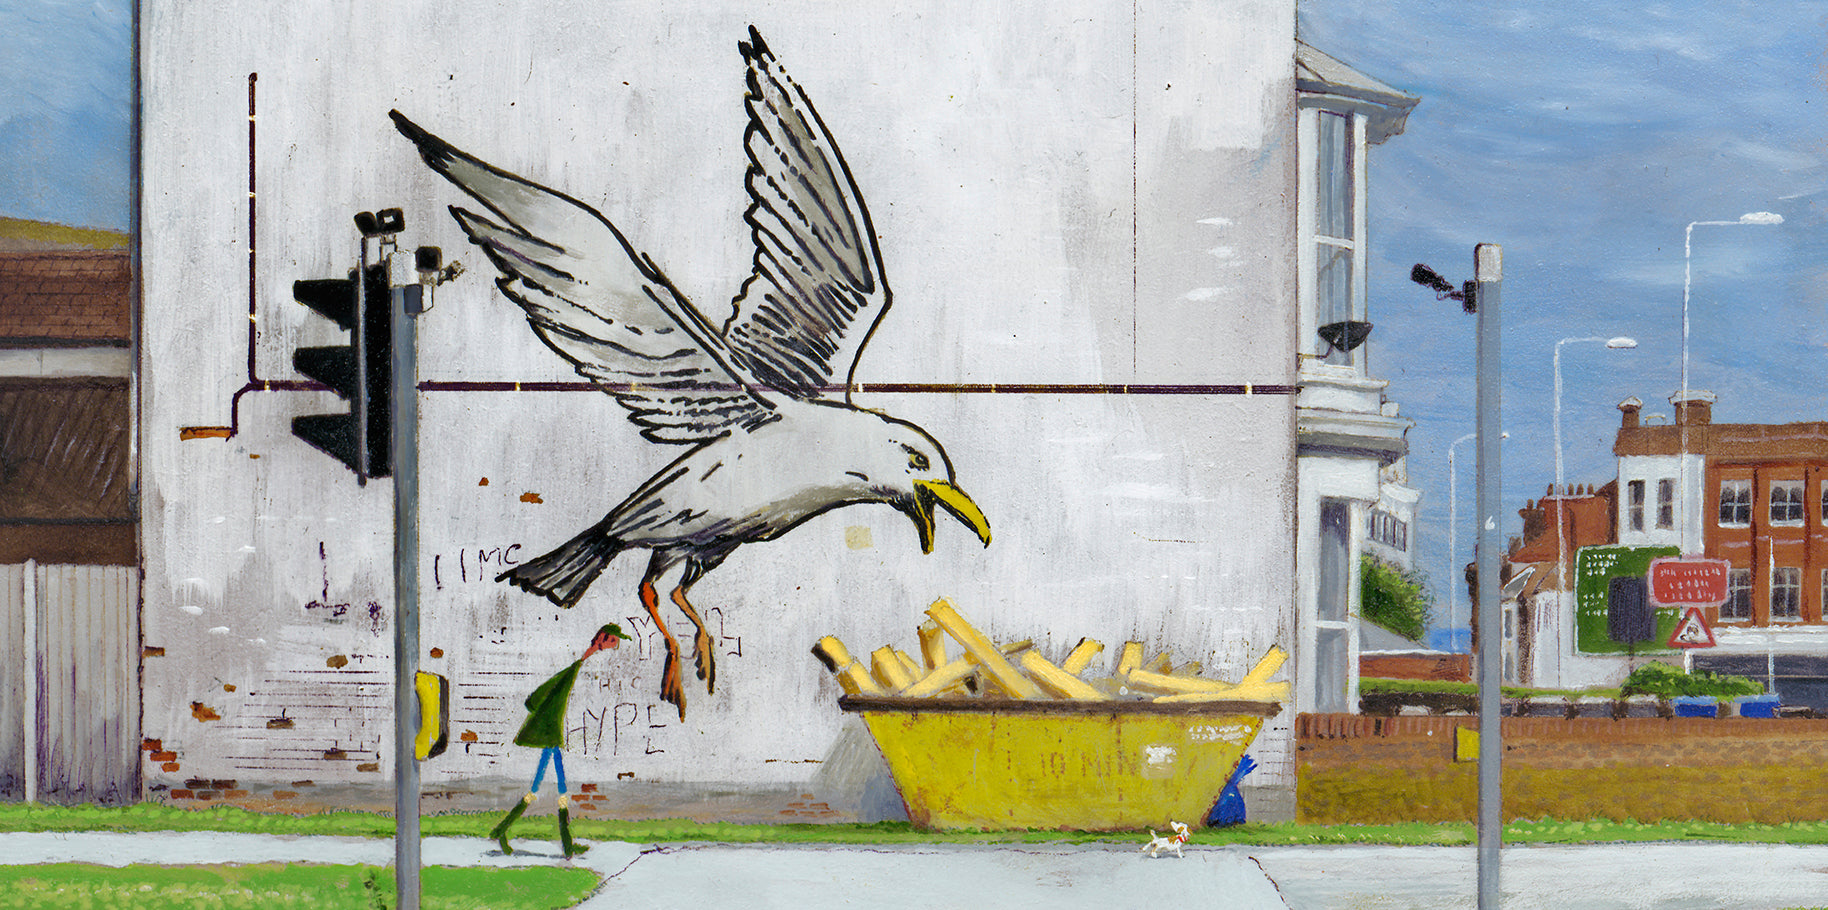 How Banksy Became One of Britain’s Most Infamous Contemporary Artists ...